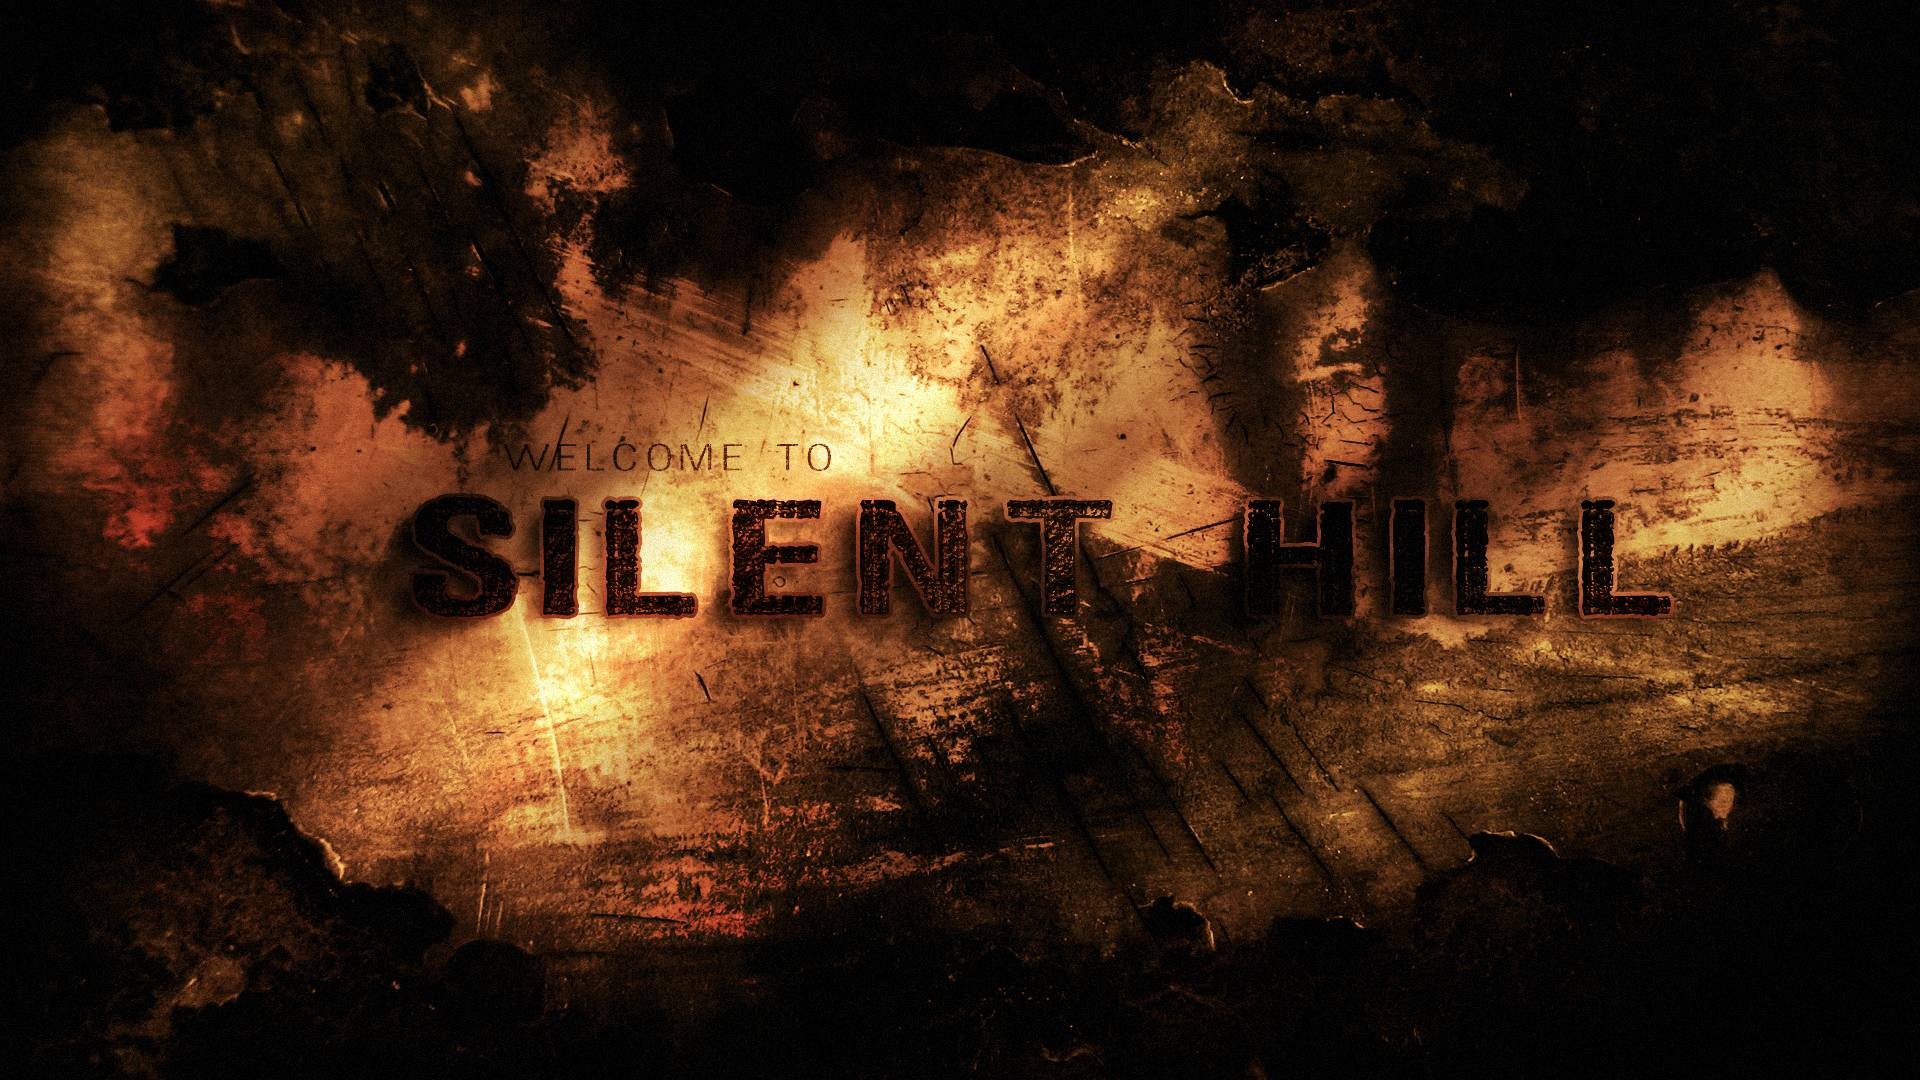 Silent Hill 2 remake among multiple Silent Hill games in development -  Polygon